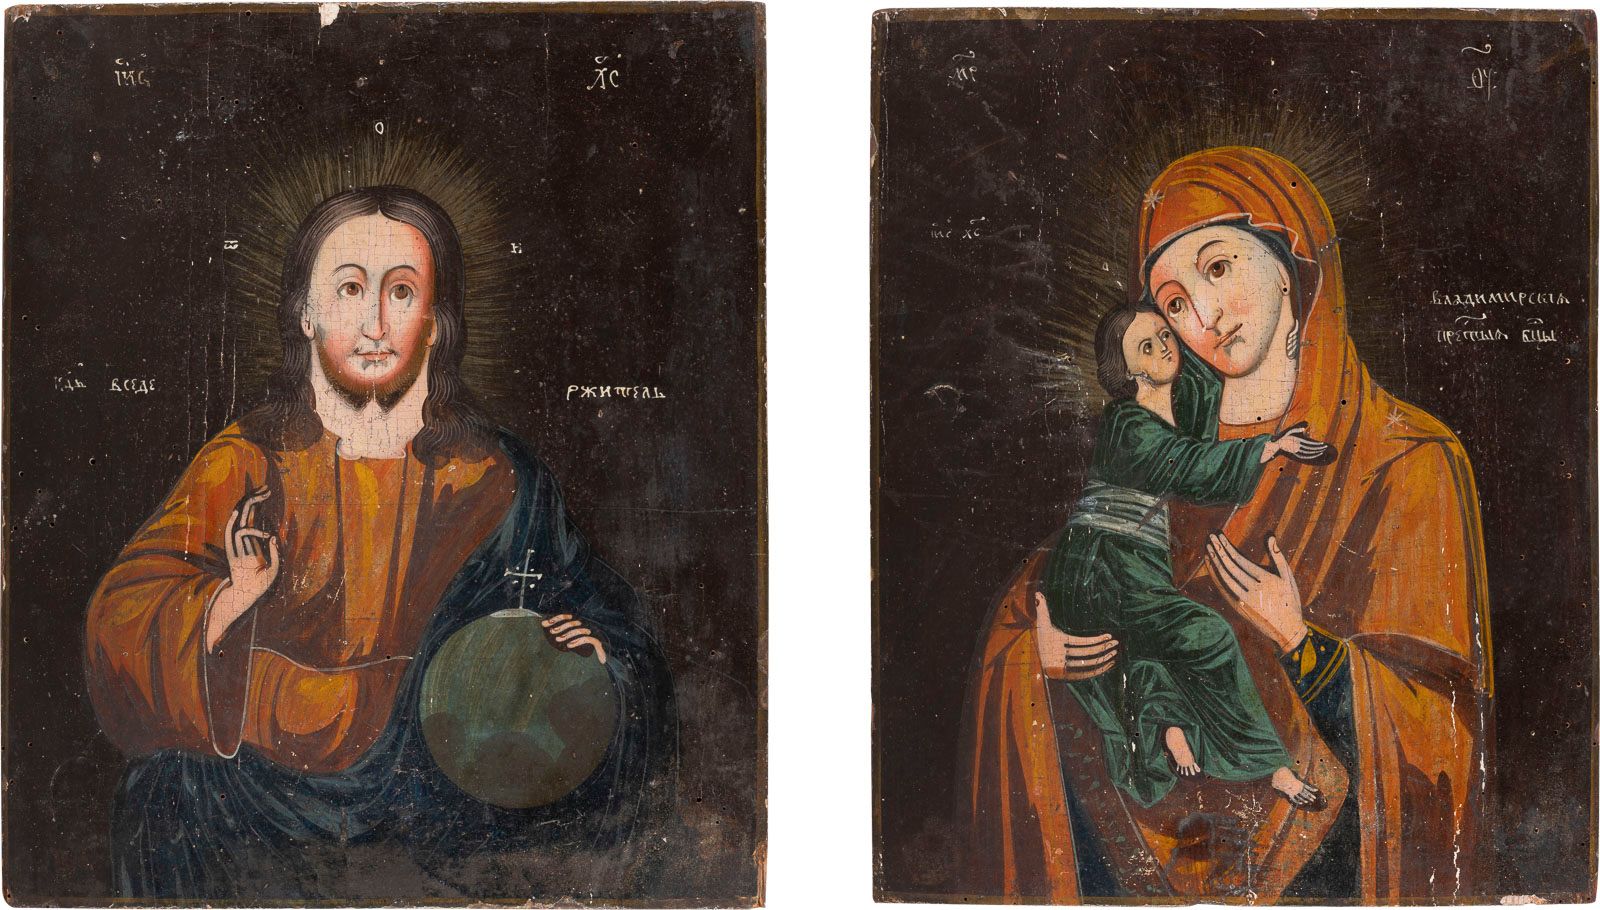 A PAIR OF WEDDING ICONS SHOWING CHRIST PANTOKRATOR AND THE PAIRE D'ICÔNES DE MAR&hellip;